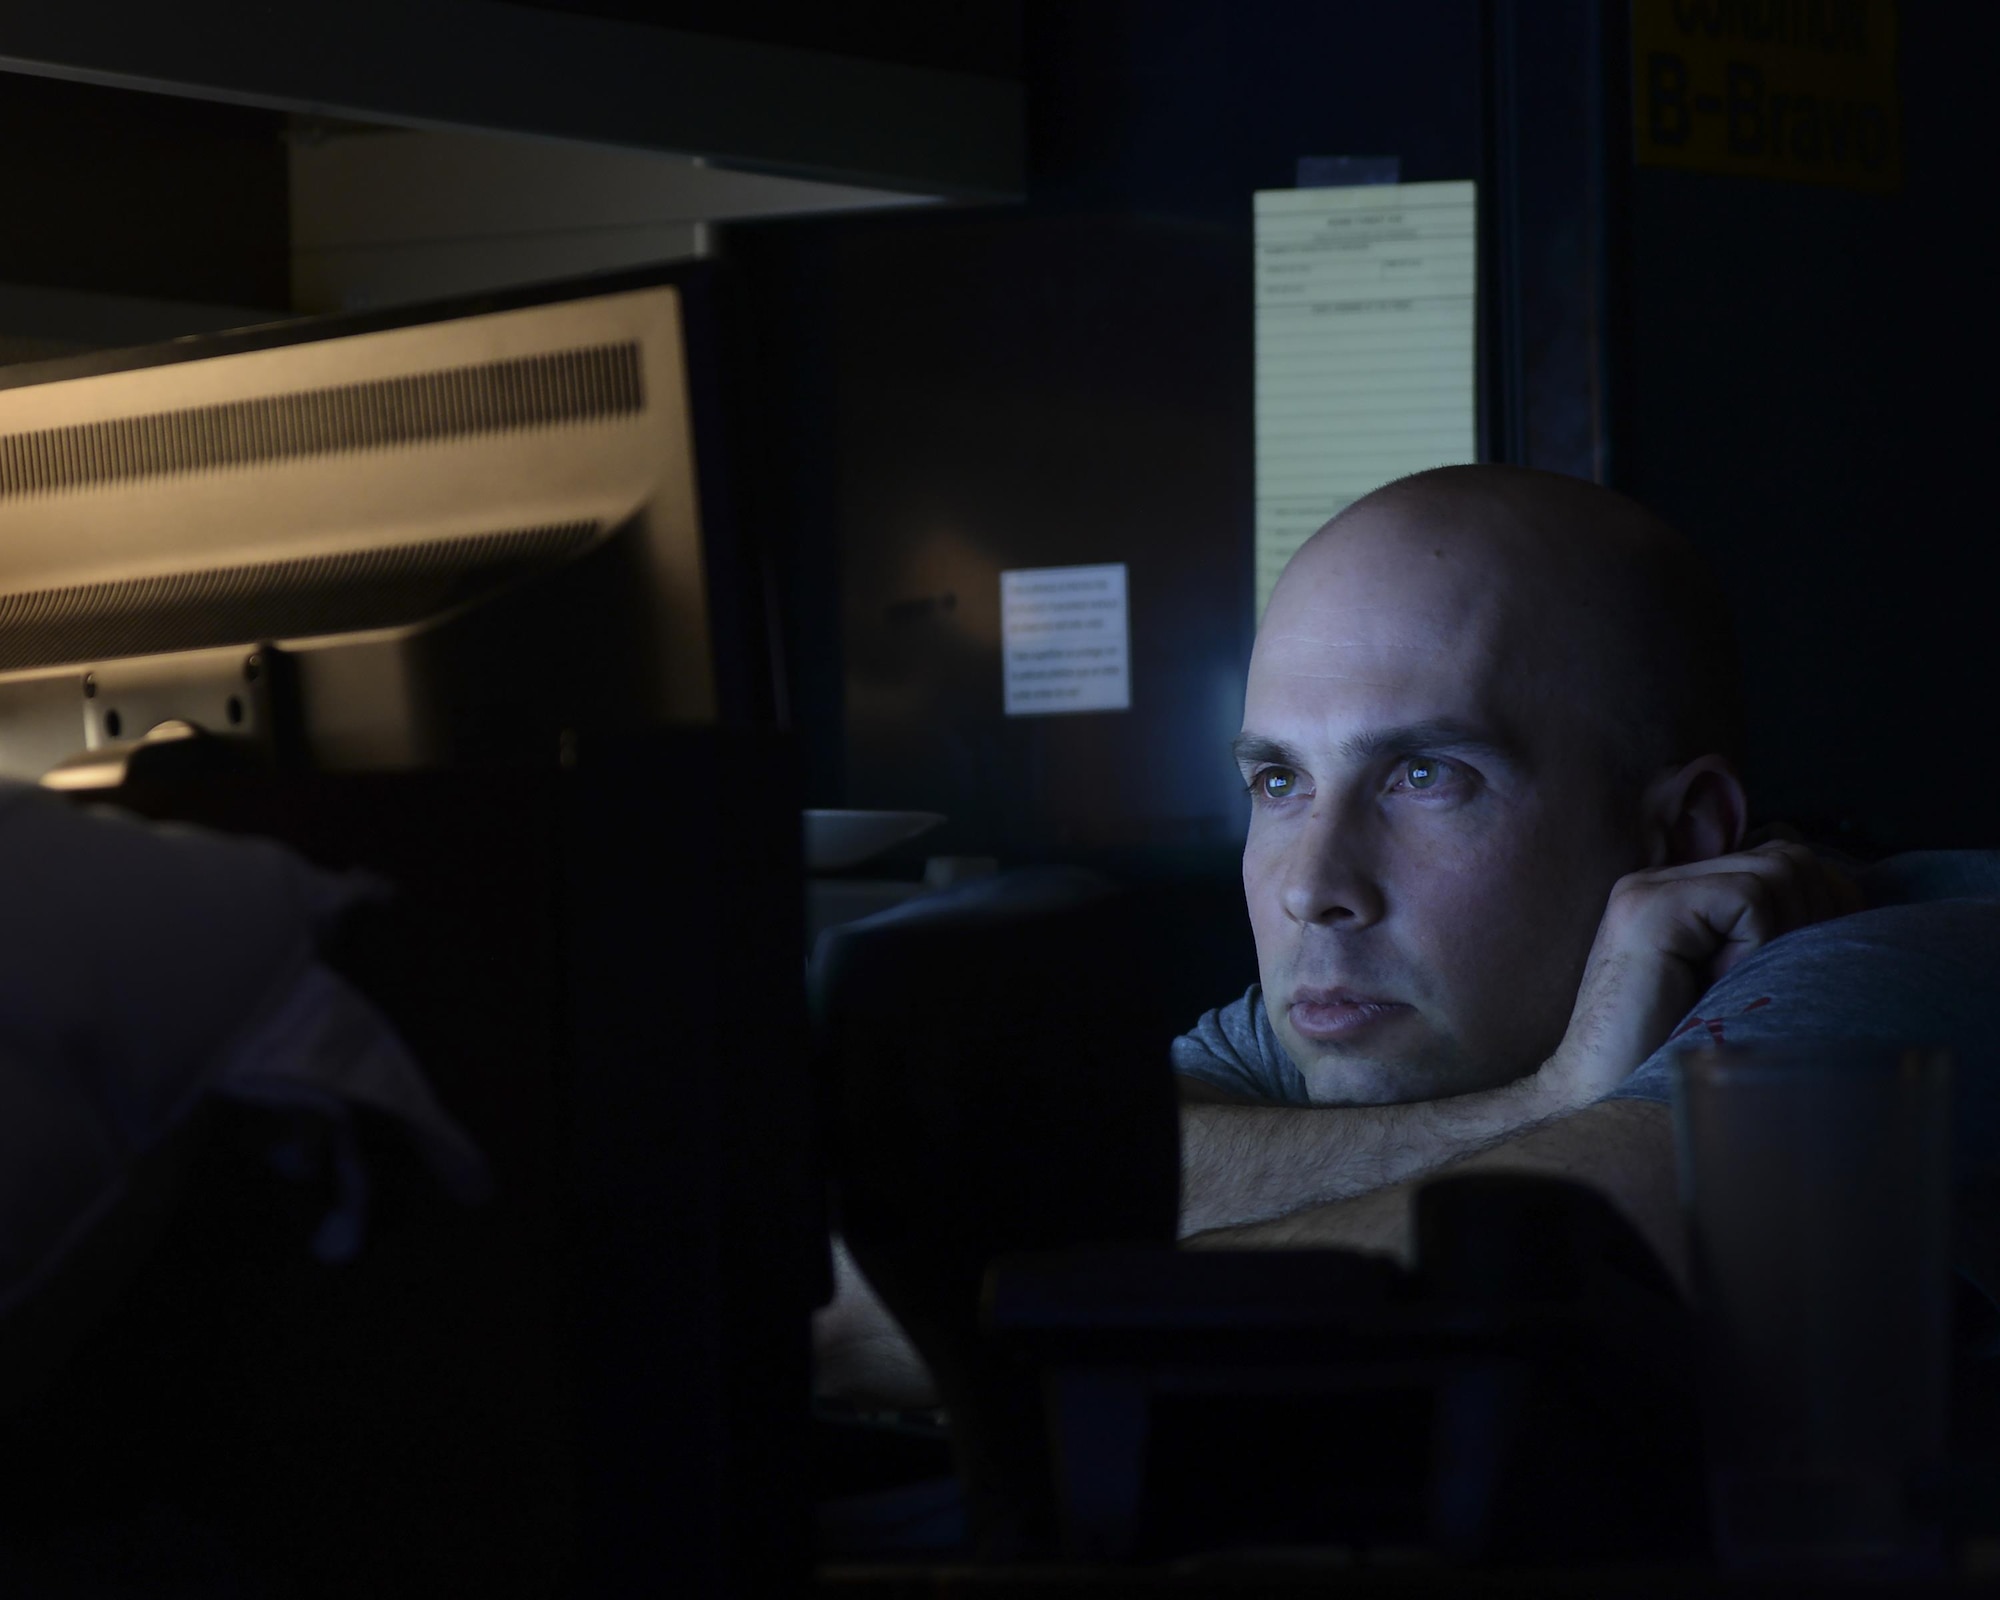 Staff Sgt. Jason Pominski, 319th Missile Squadron facility manager, watches a video during his downtime Feb. 8, 2016, at a Missile Alert Facility in the F.E. Warren Air Force Base, Wyo., missile complex. Facility managers lead the topside enlisted Airmen in MAFs and take care of the grounds and facility. (U.S. Air Force photo by Senior Airman Jason Wiese)